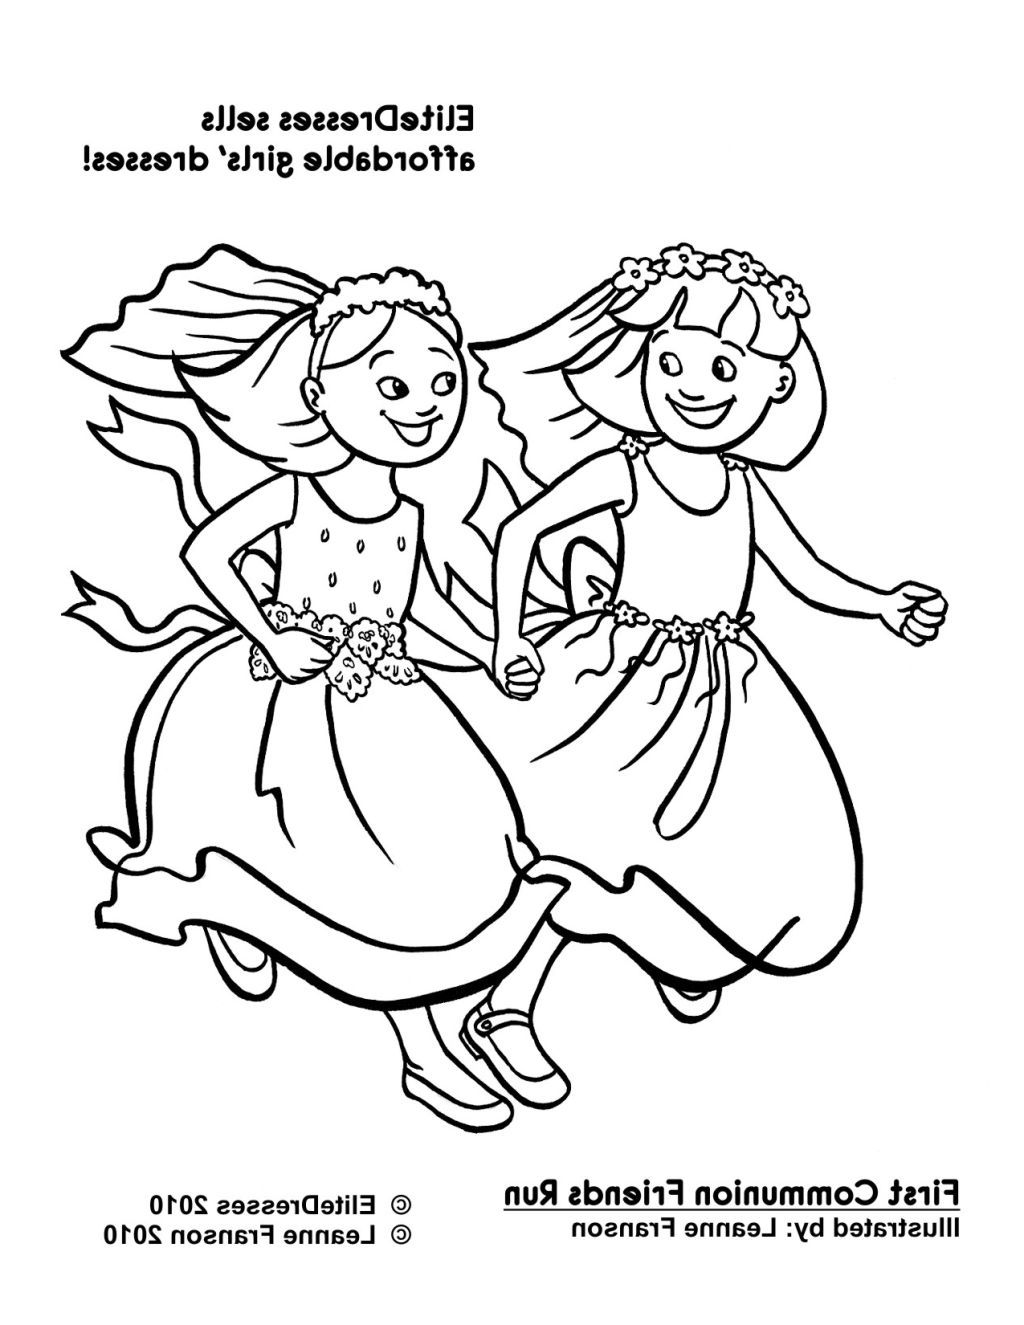 Friendship Coloring Pages Printable Â» Coloring Pages Kids